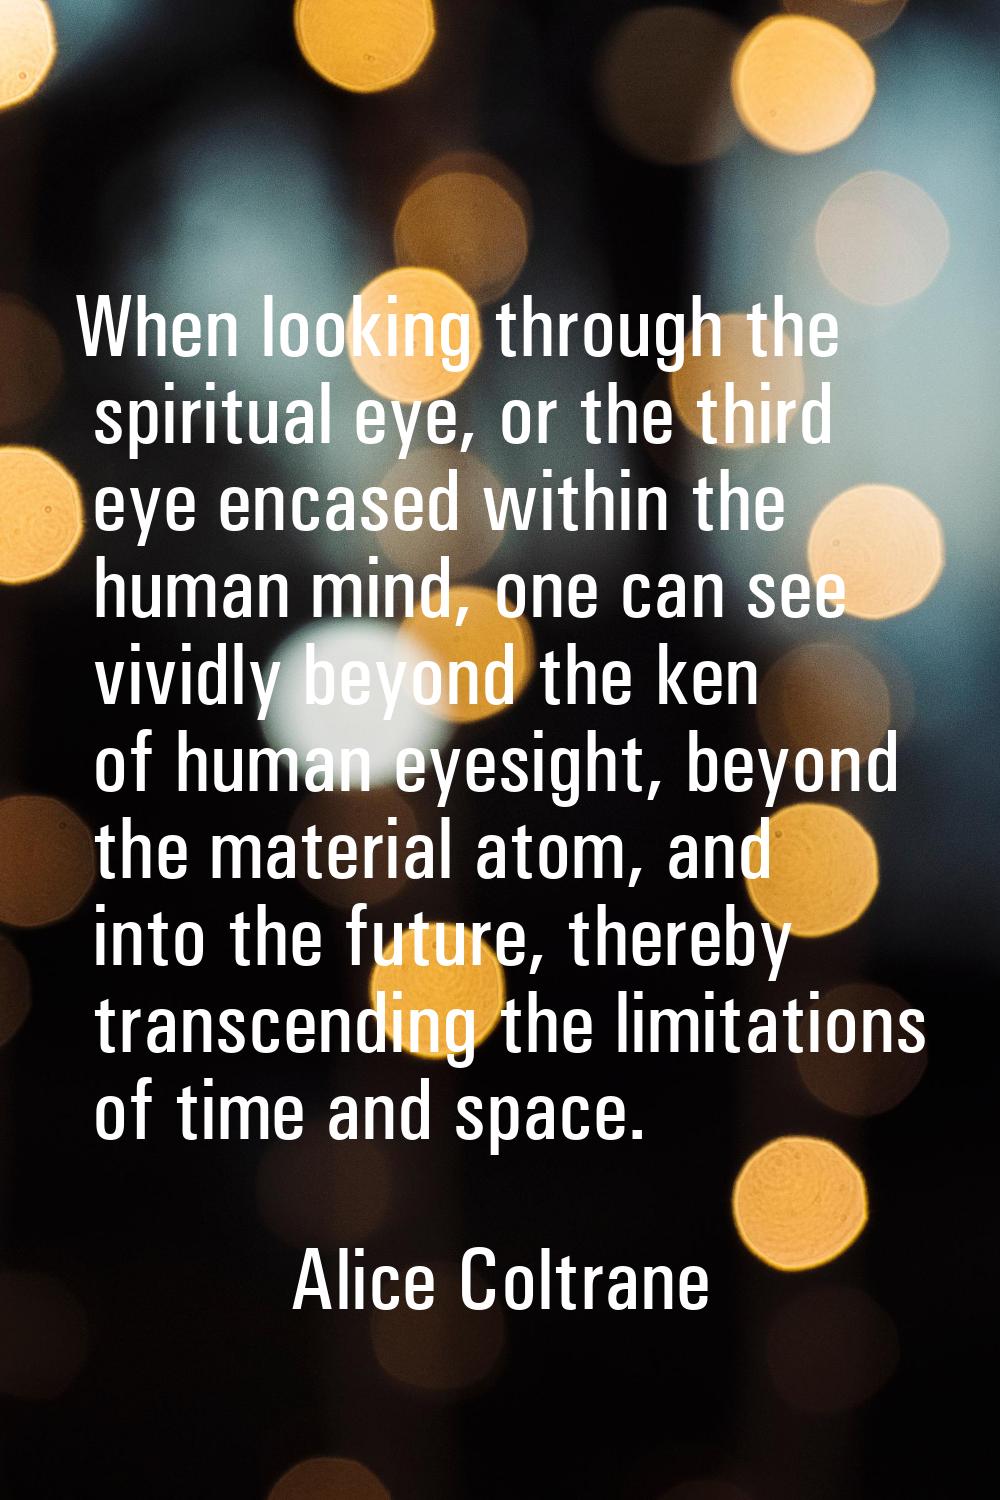 When looking through the spiritual eye, or the third eye encased within the human mind, one can see